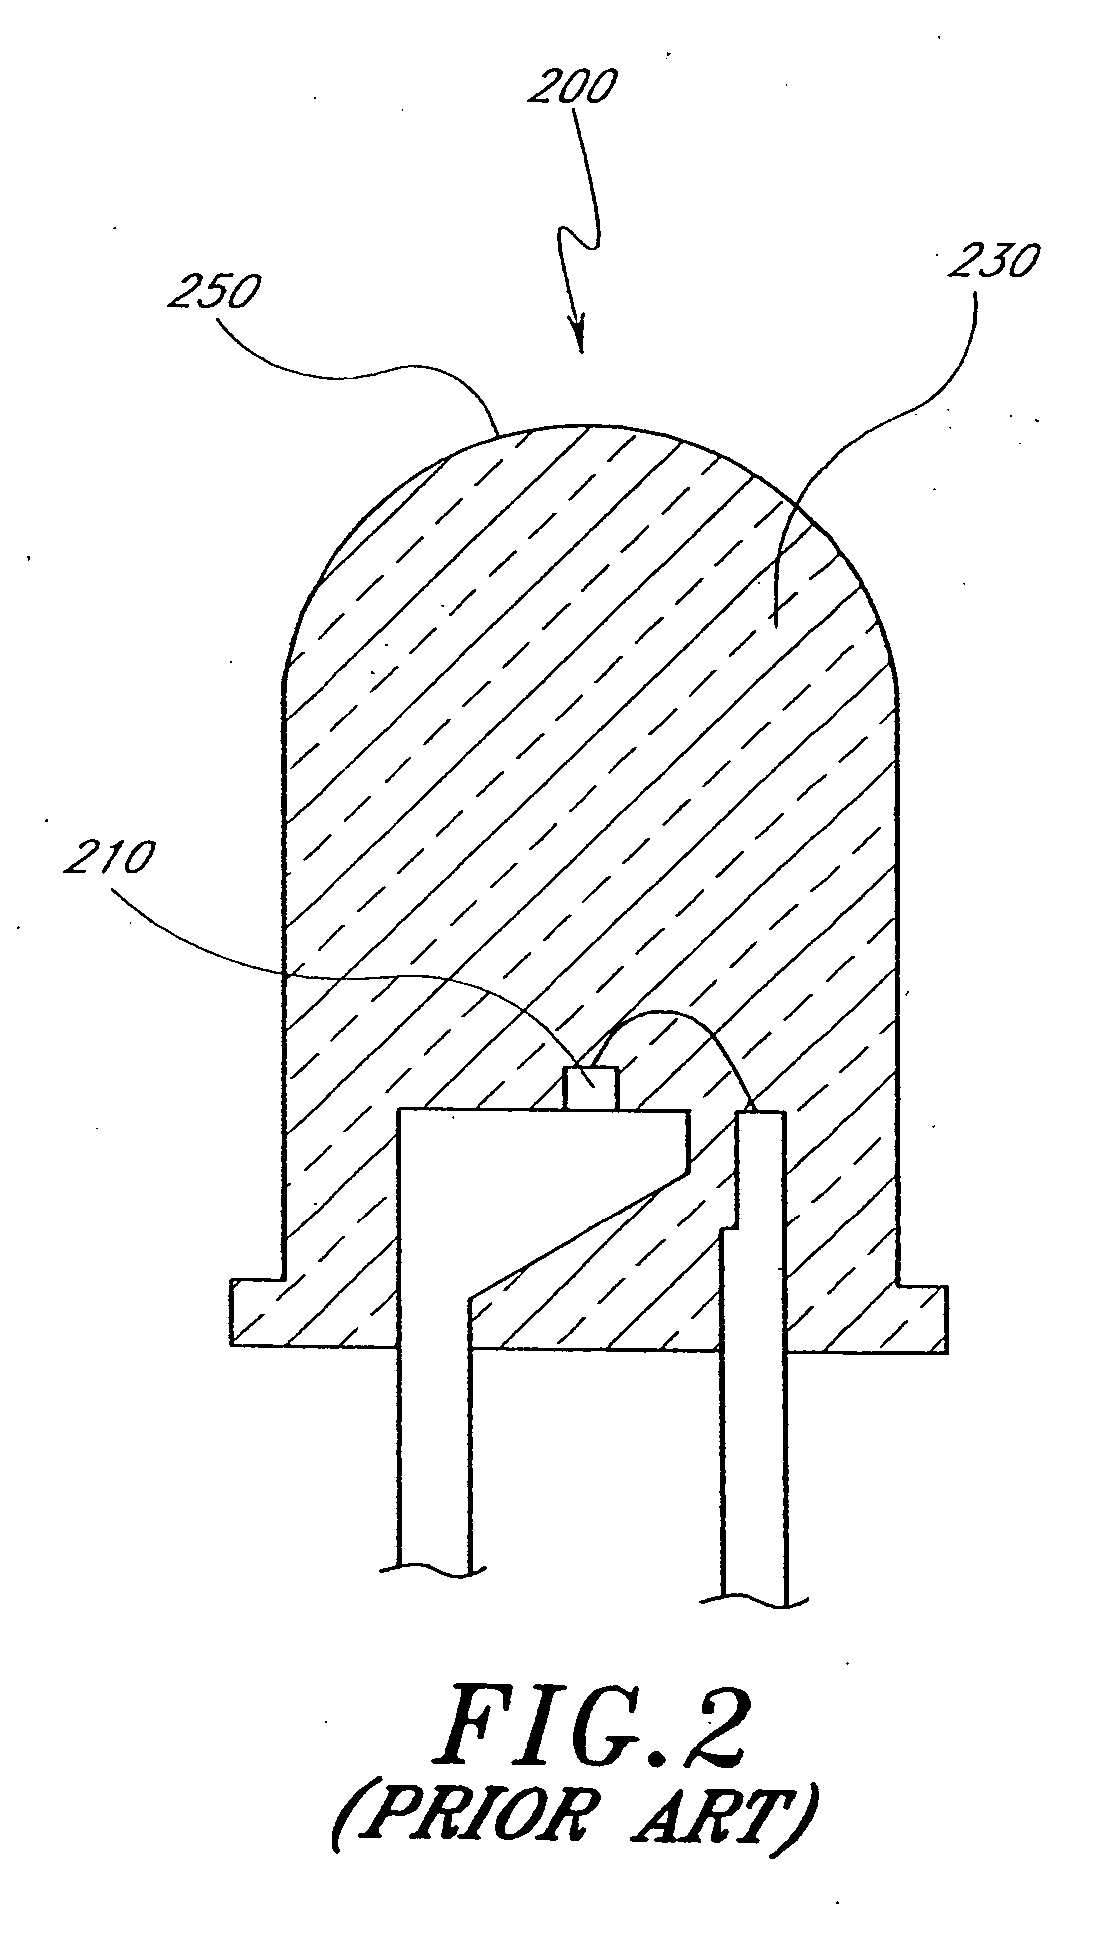 Method of providing an optoelectronic element with a non-protruding lens